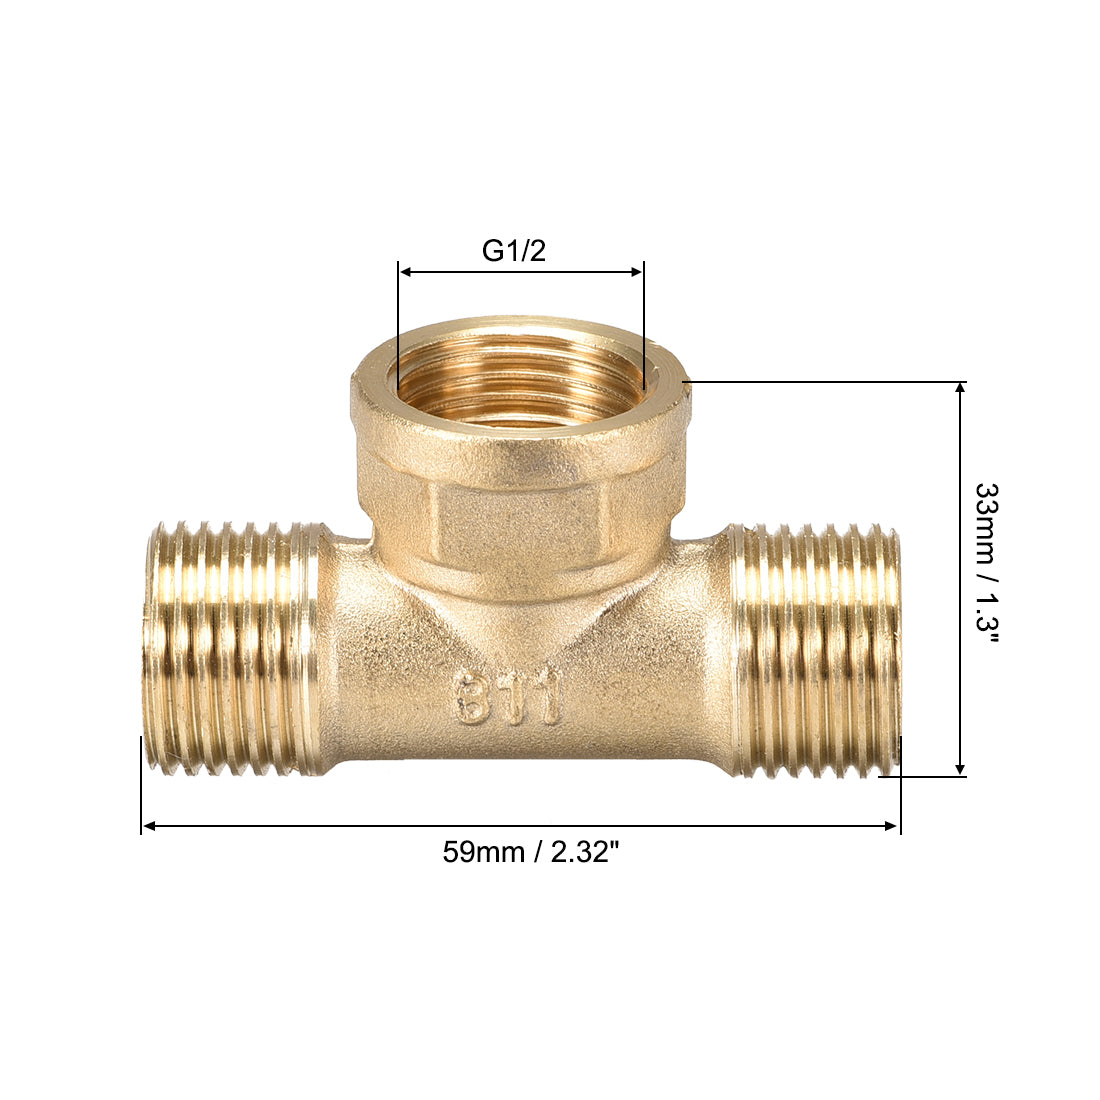 uxcell Uxcell Brass Tee Pipe Fitting G1/2 Male x G1/2  Female x G1/2 Male T Shaped Connector Coupler 3pcs